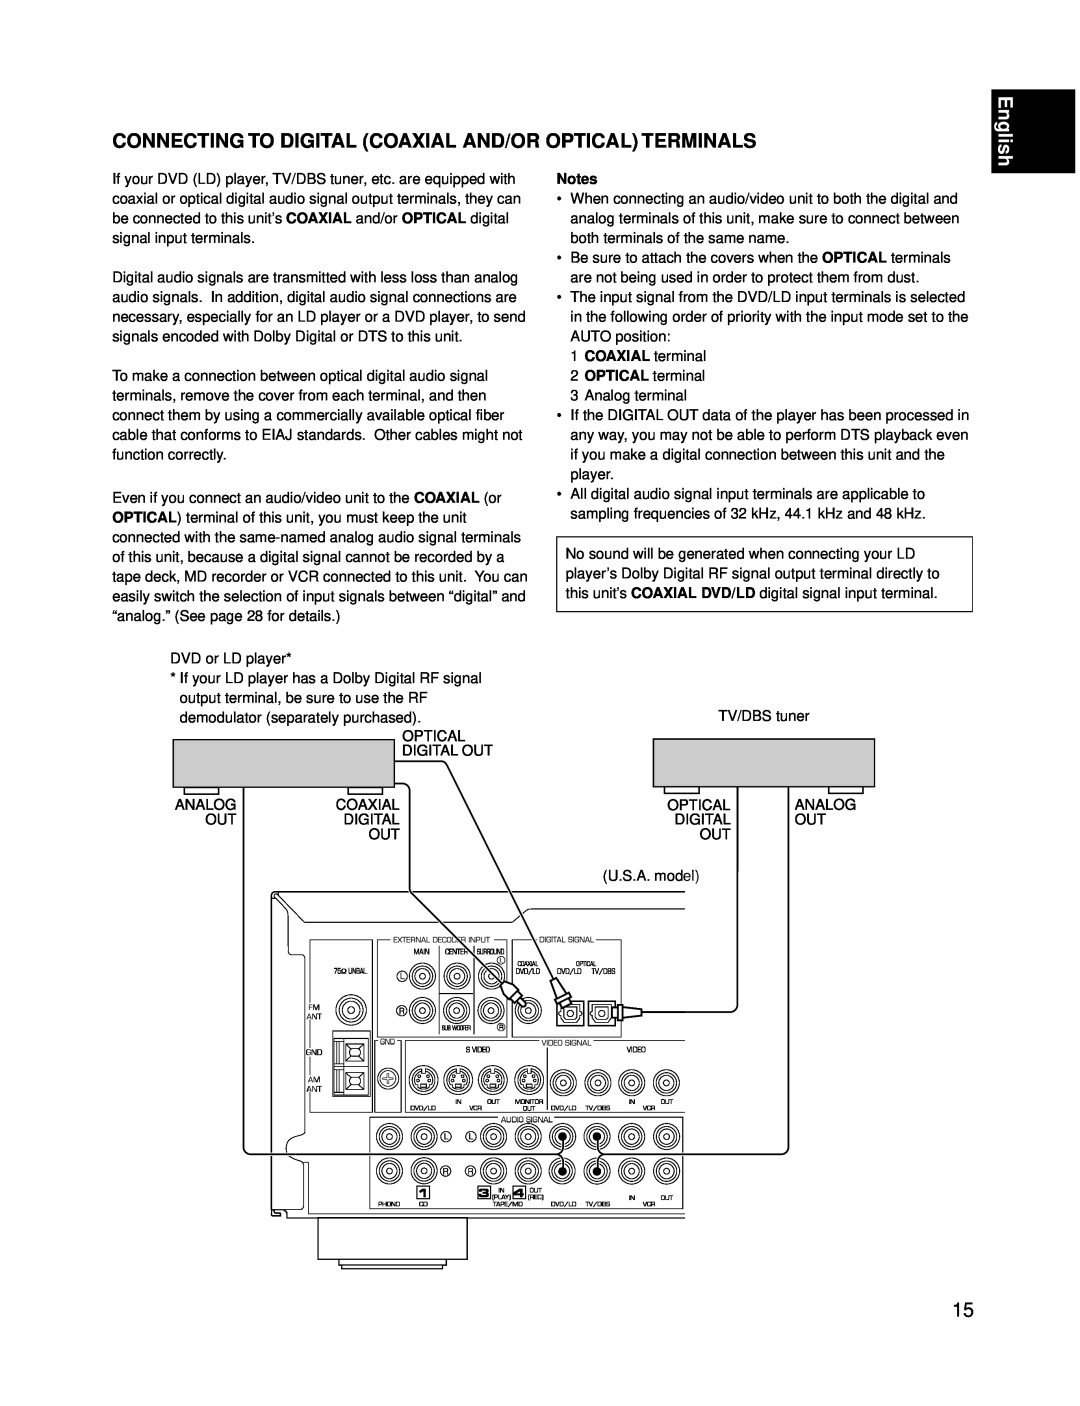 Yamaha RX-V595A owner manual Connecting To Digital Coaxial And/Or Optical Terminals, English 